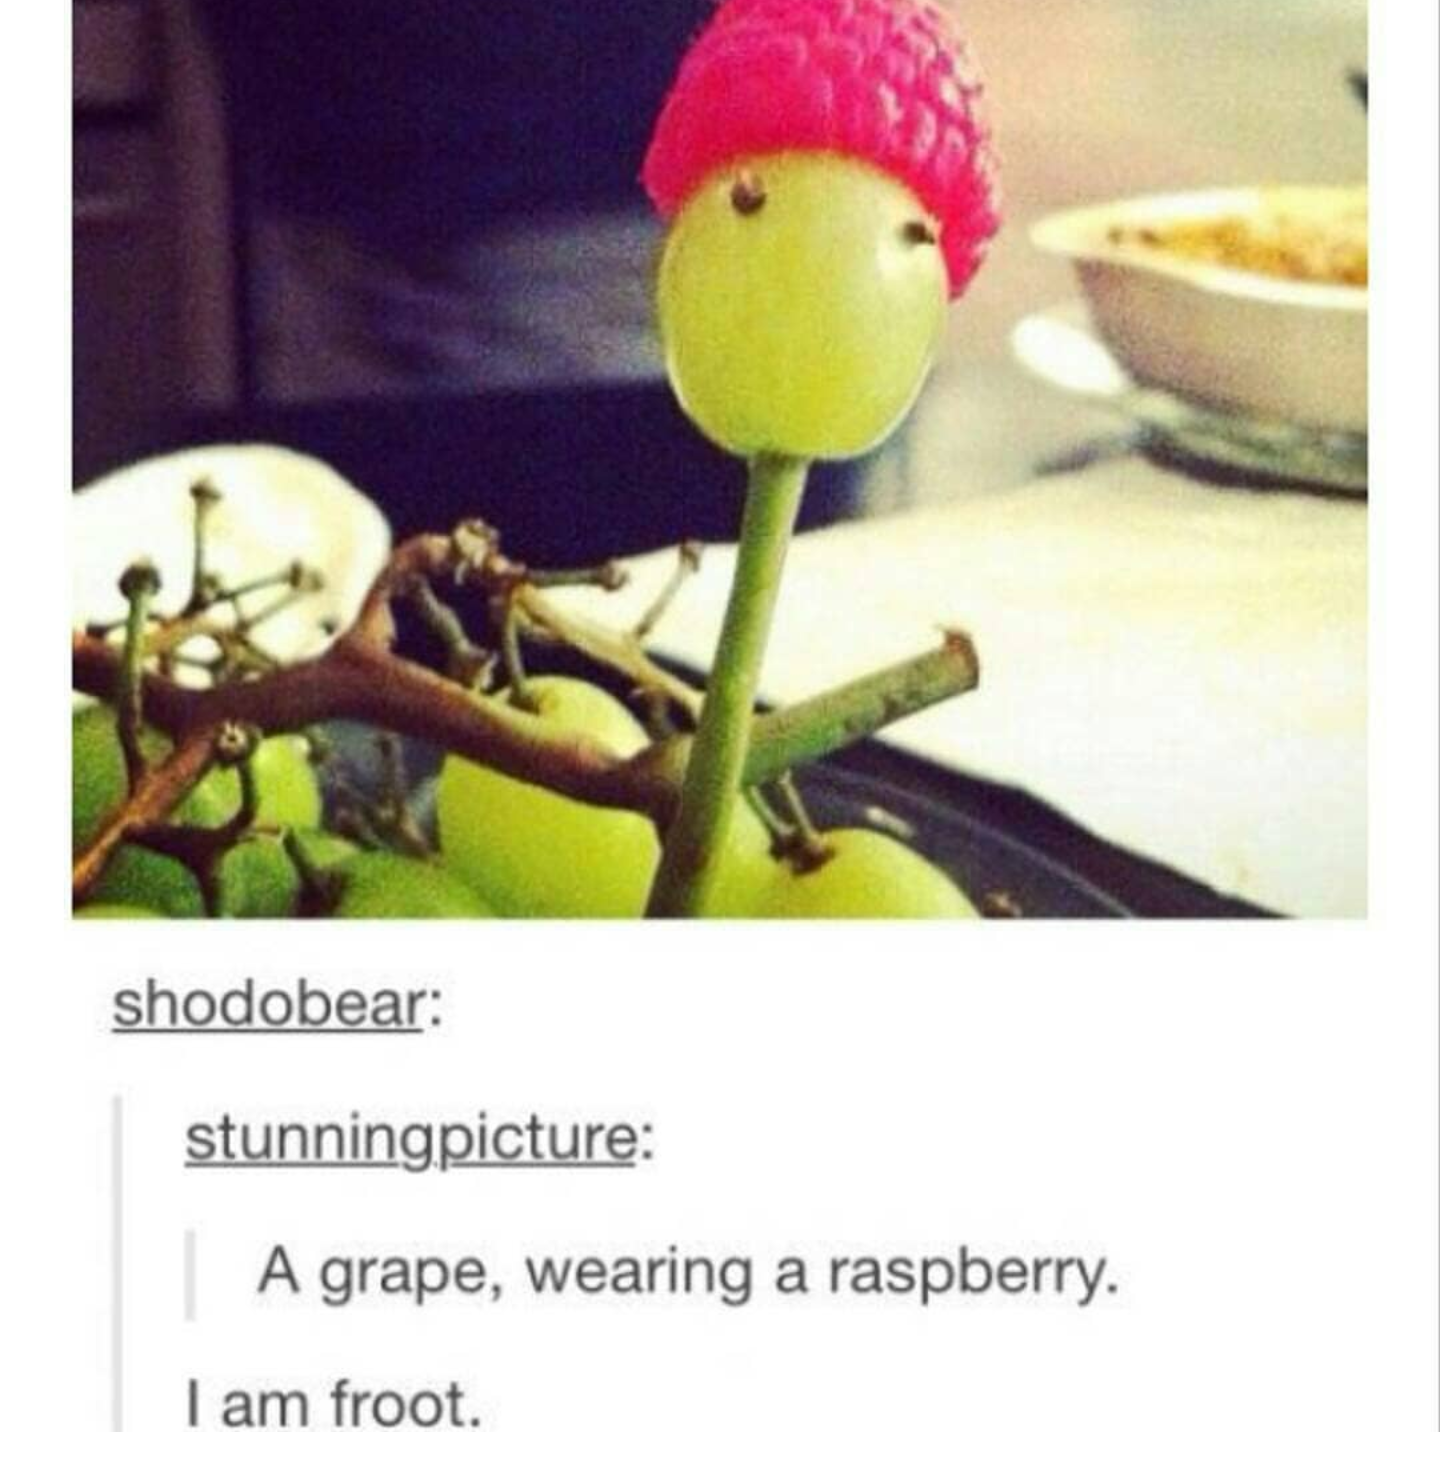 pun about a grape wearing a raspberry as a hat that it is a froot